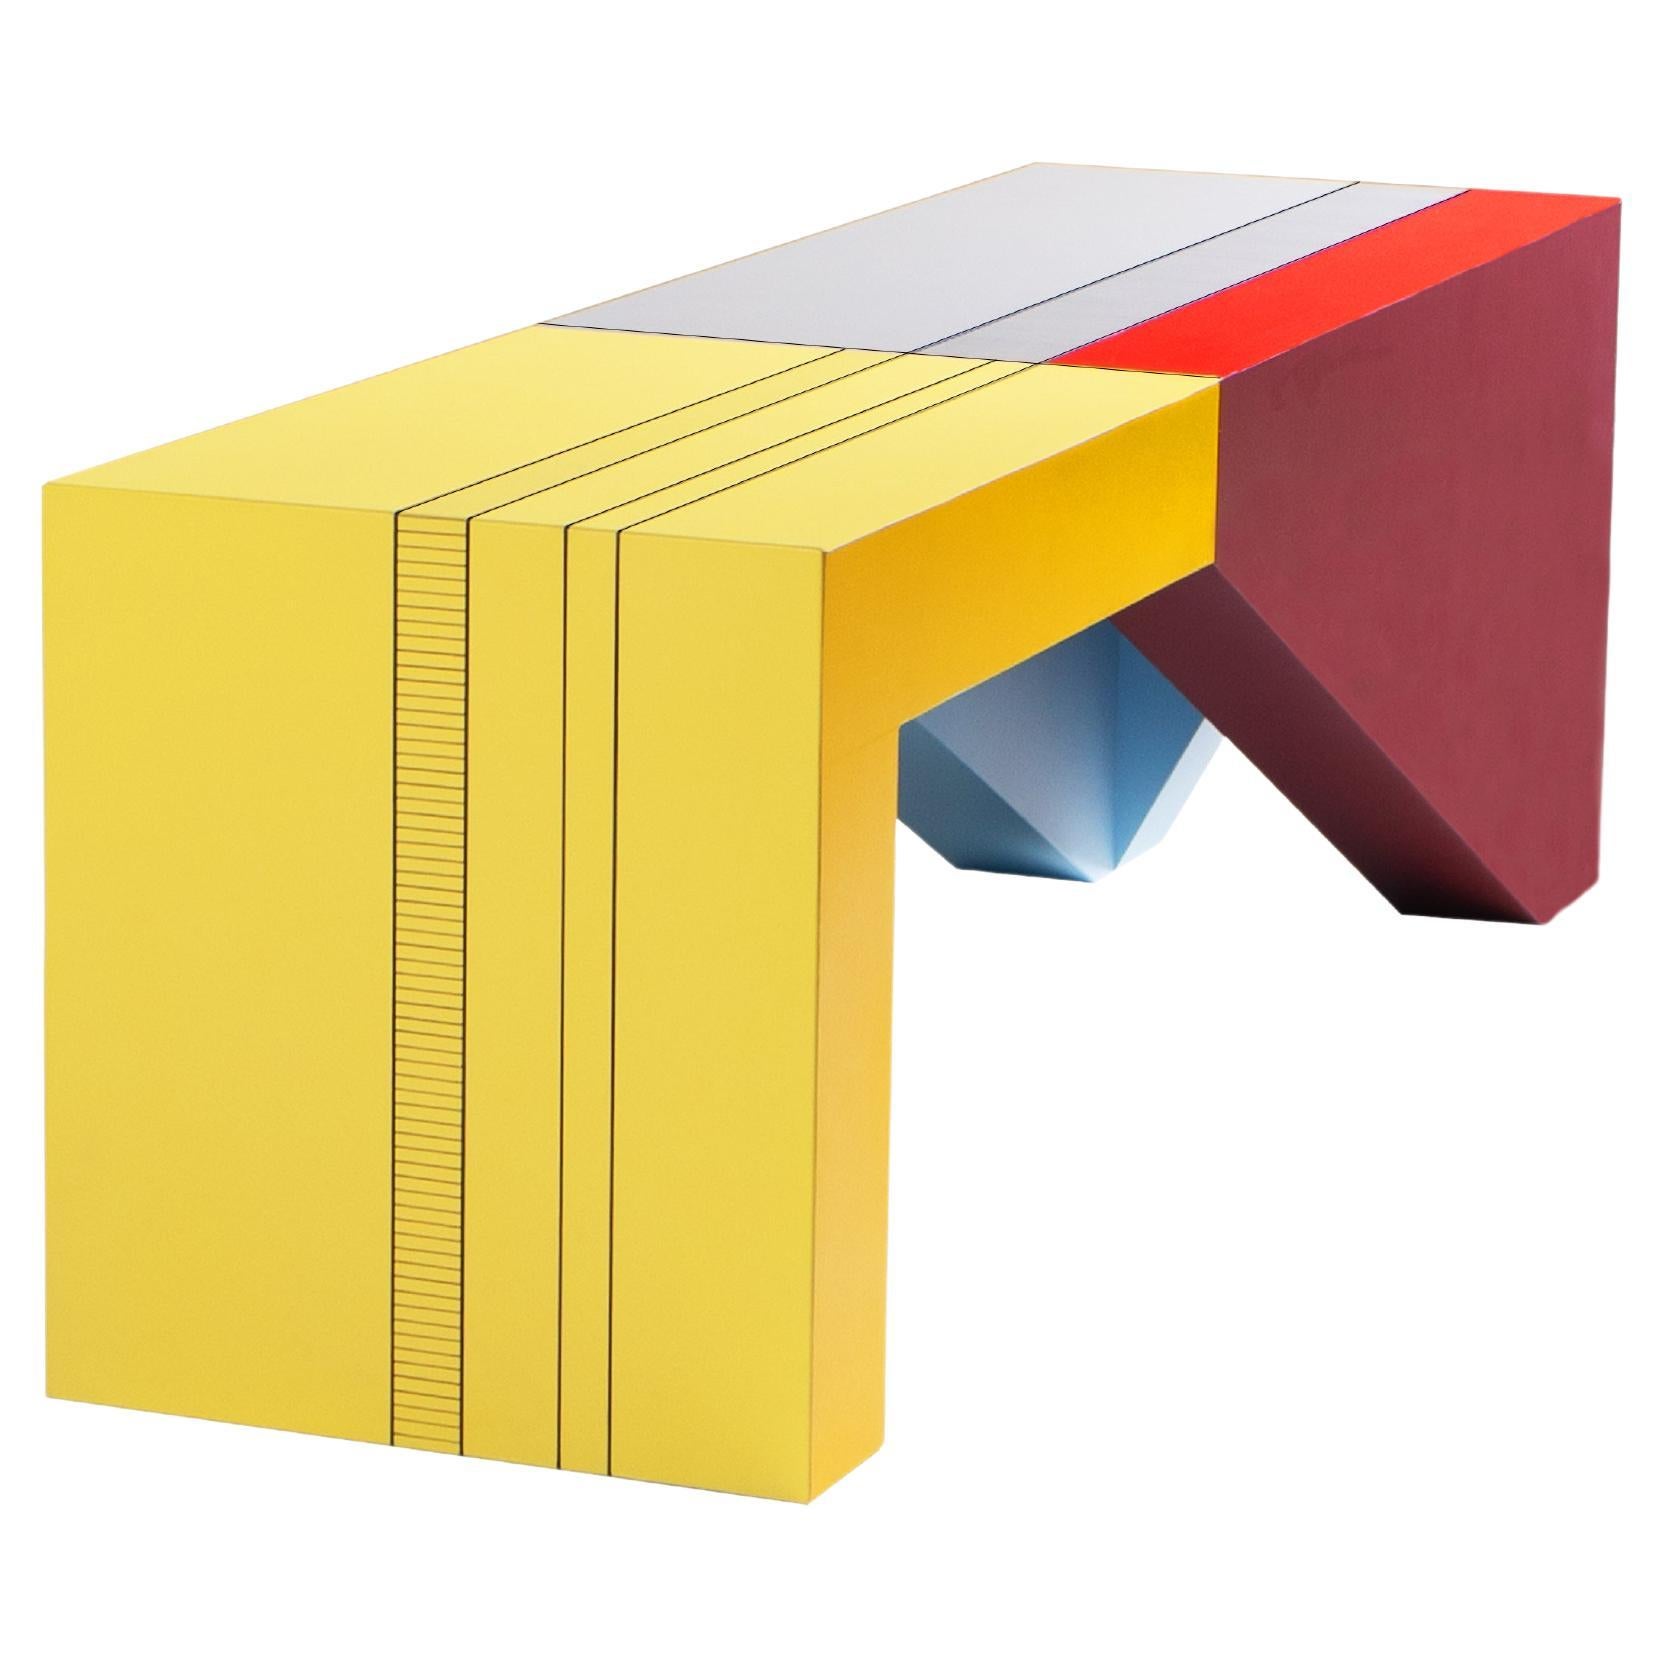 Modern Handpainted Hardwood Bench CoffeeTable Dilmos Colourful Geometric Graphic For Sale